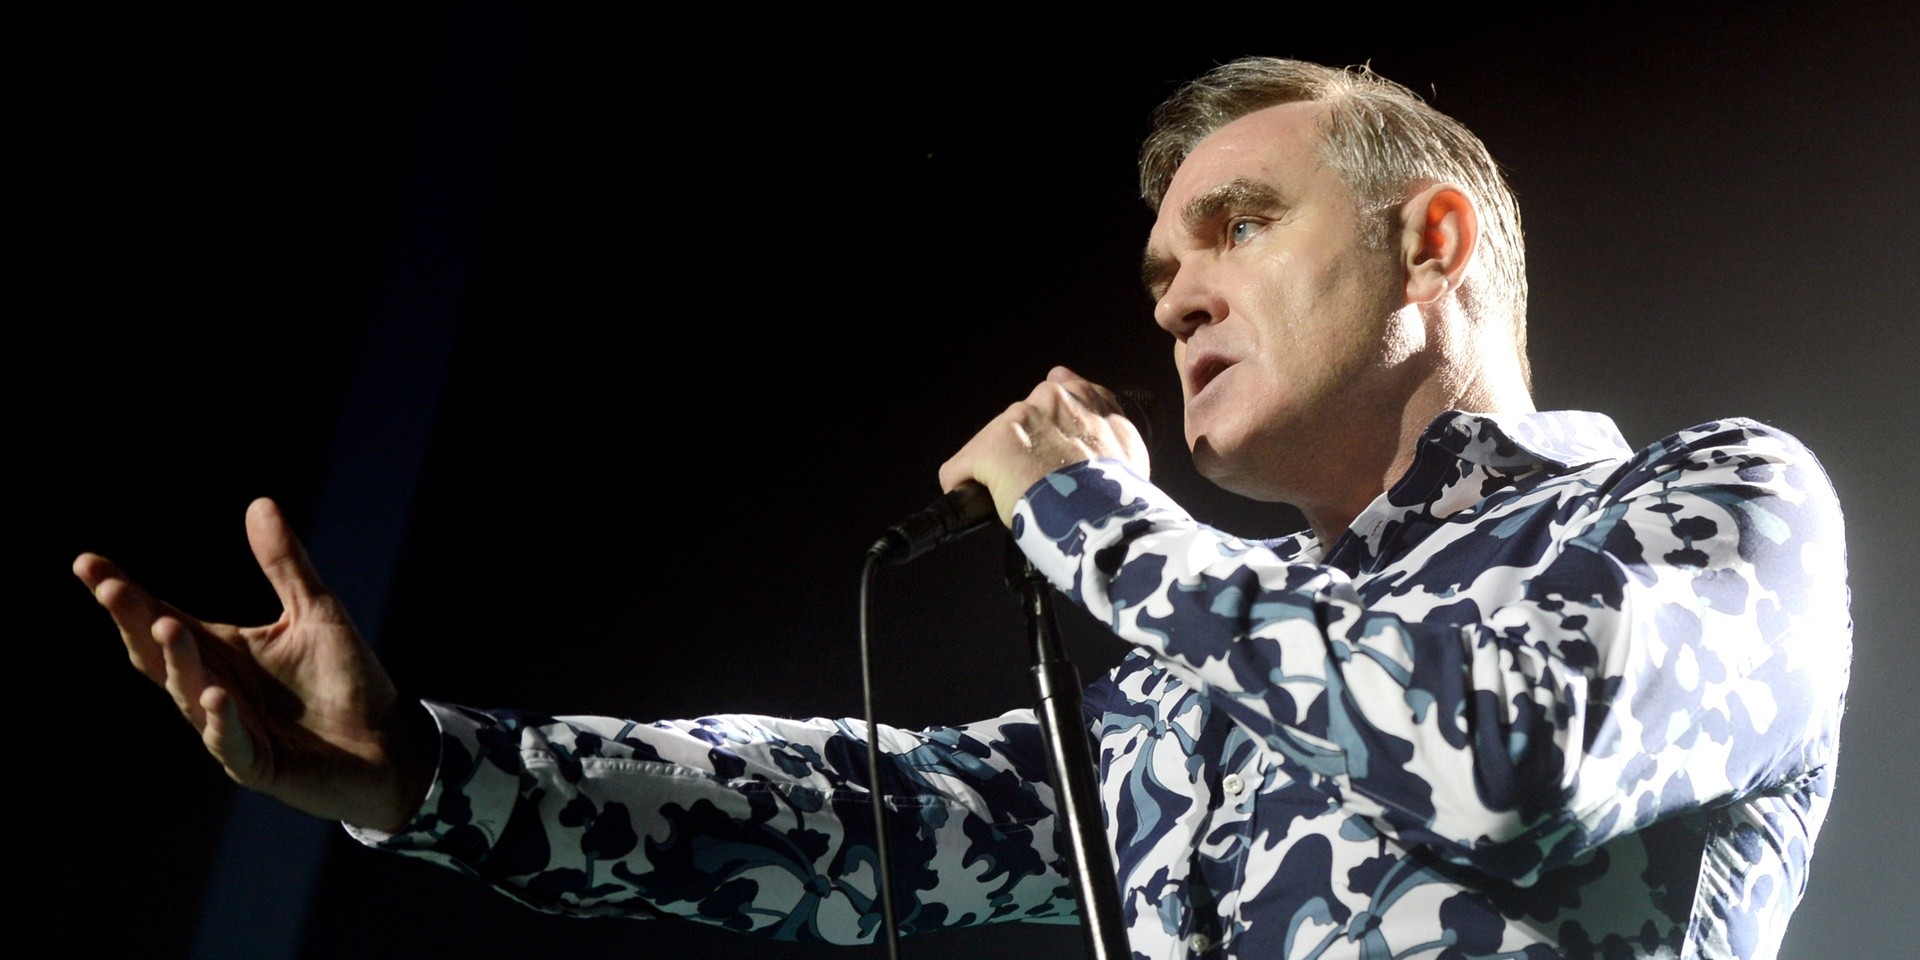 Morrissey has postponed his show in Singapore to Monday